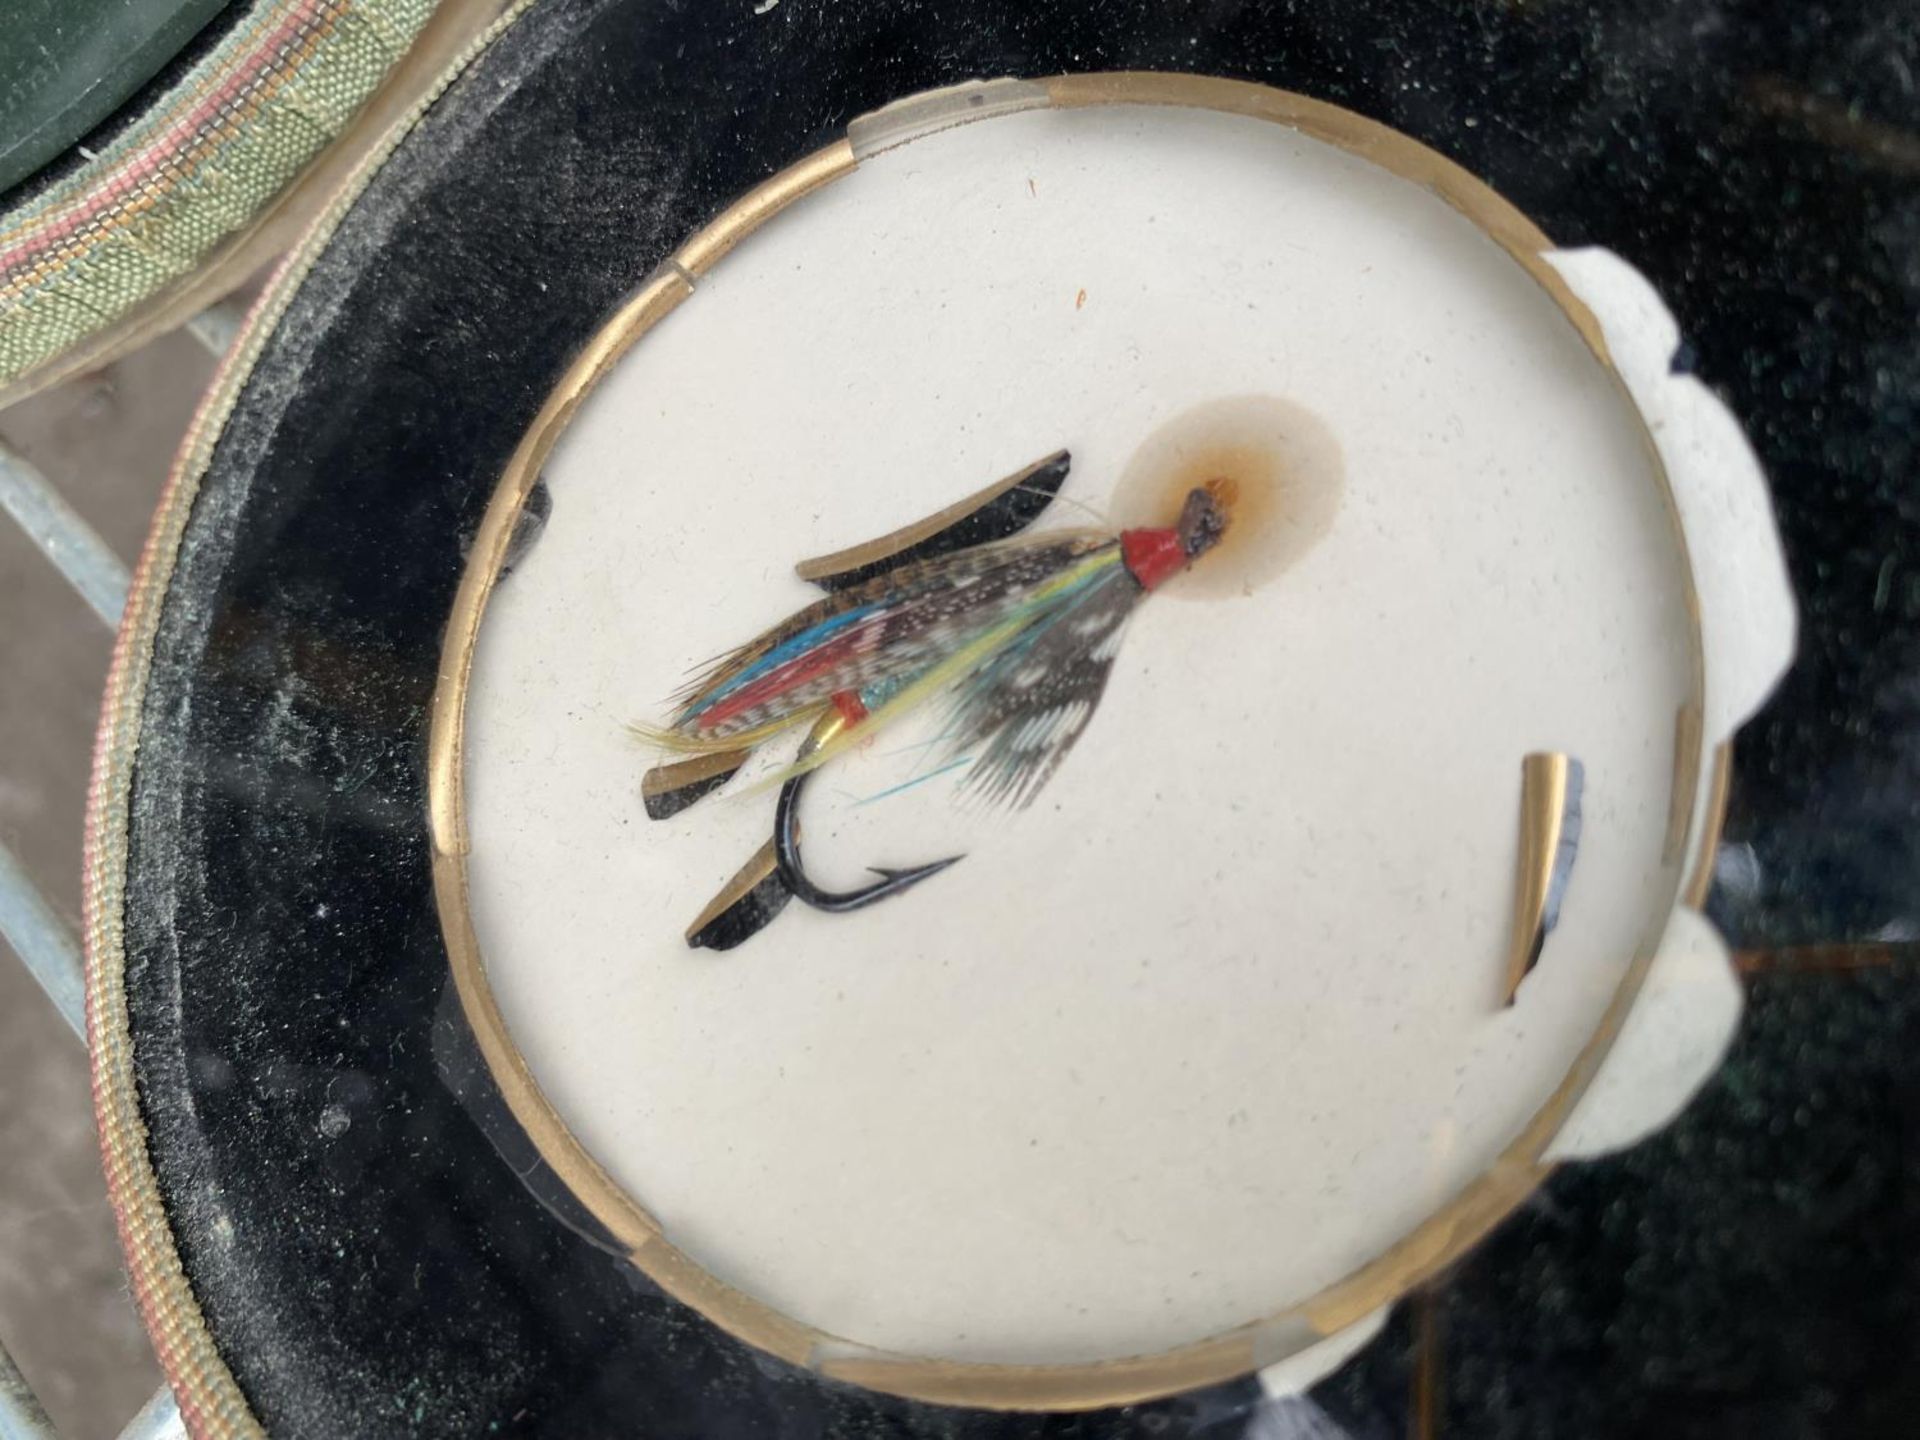 A COLLECTION OF GLASS COASTERS WITH FISHING FLIES INSIDE - Image 4 of 7